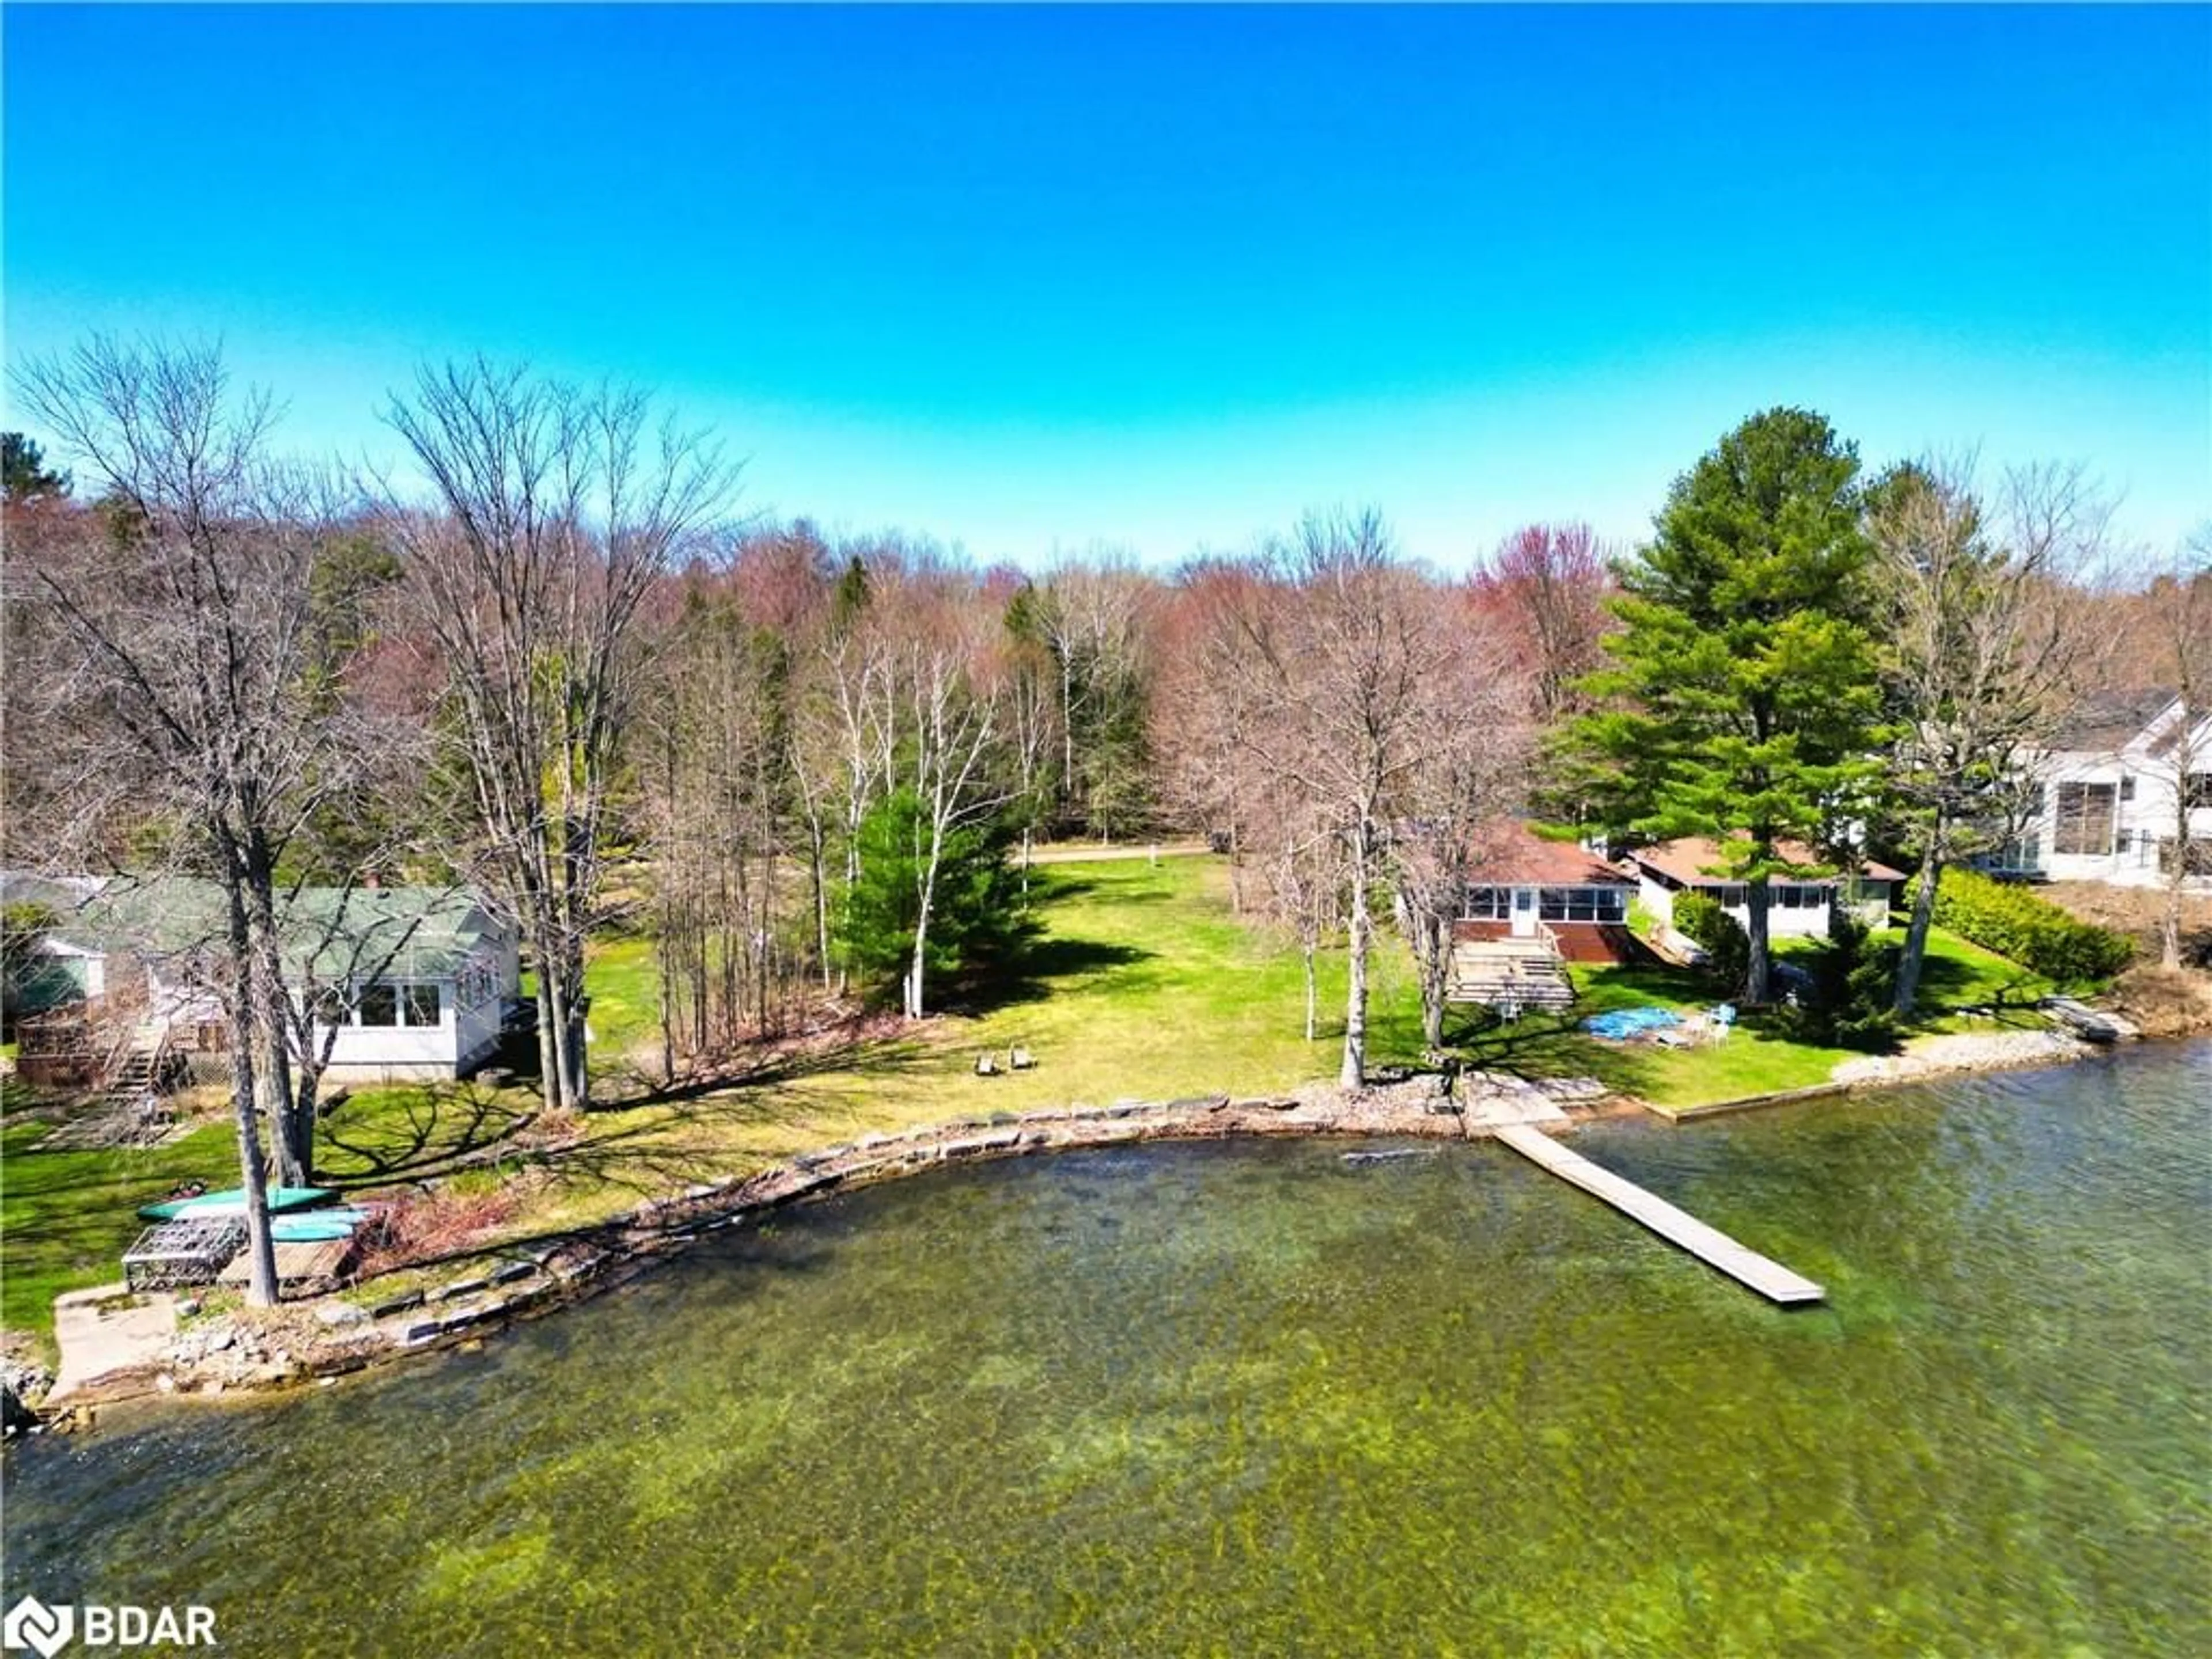 Lakeview for 3283 Crescent Bay Rd, Washago Ontario L0K 1B0